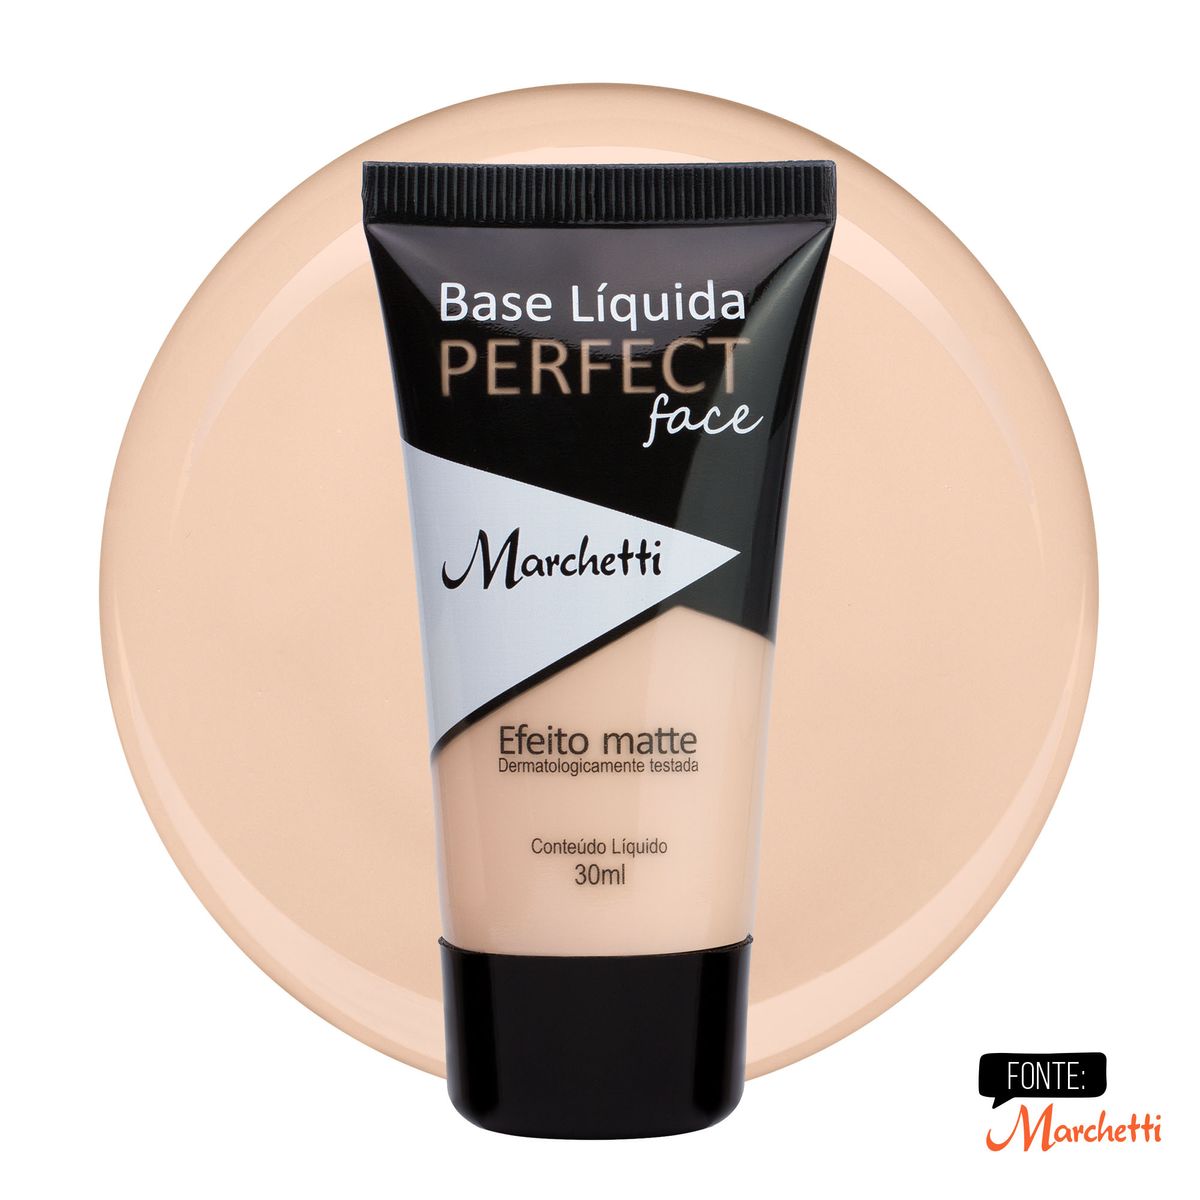 Base Líquida Marchetti Perfect Face 2 Bege 30ml image number 0